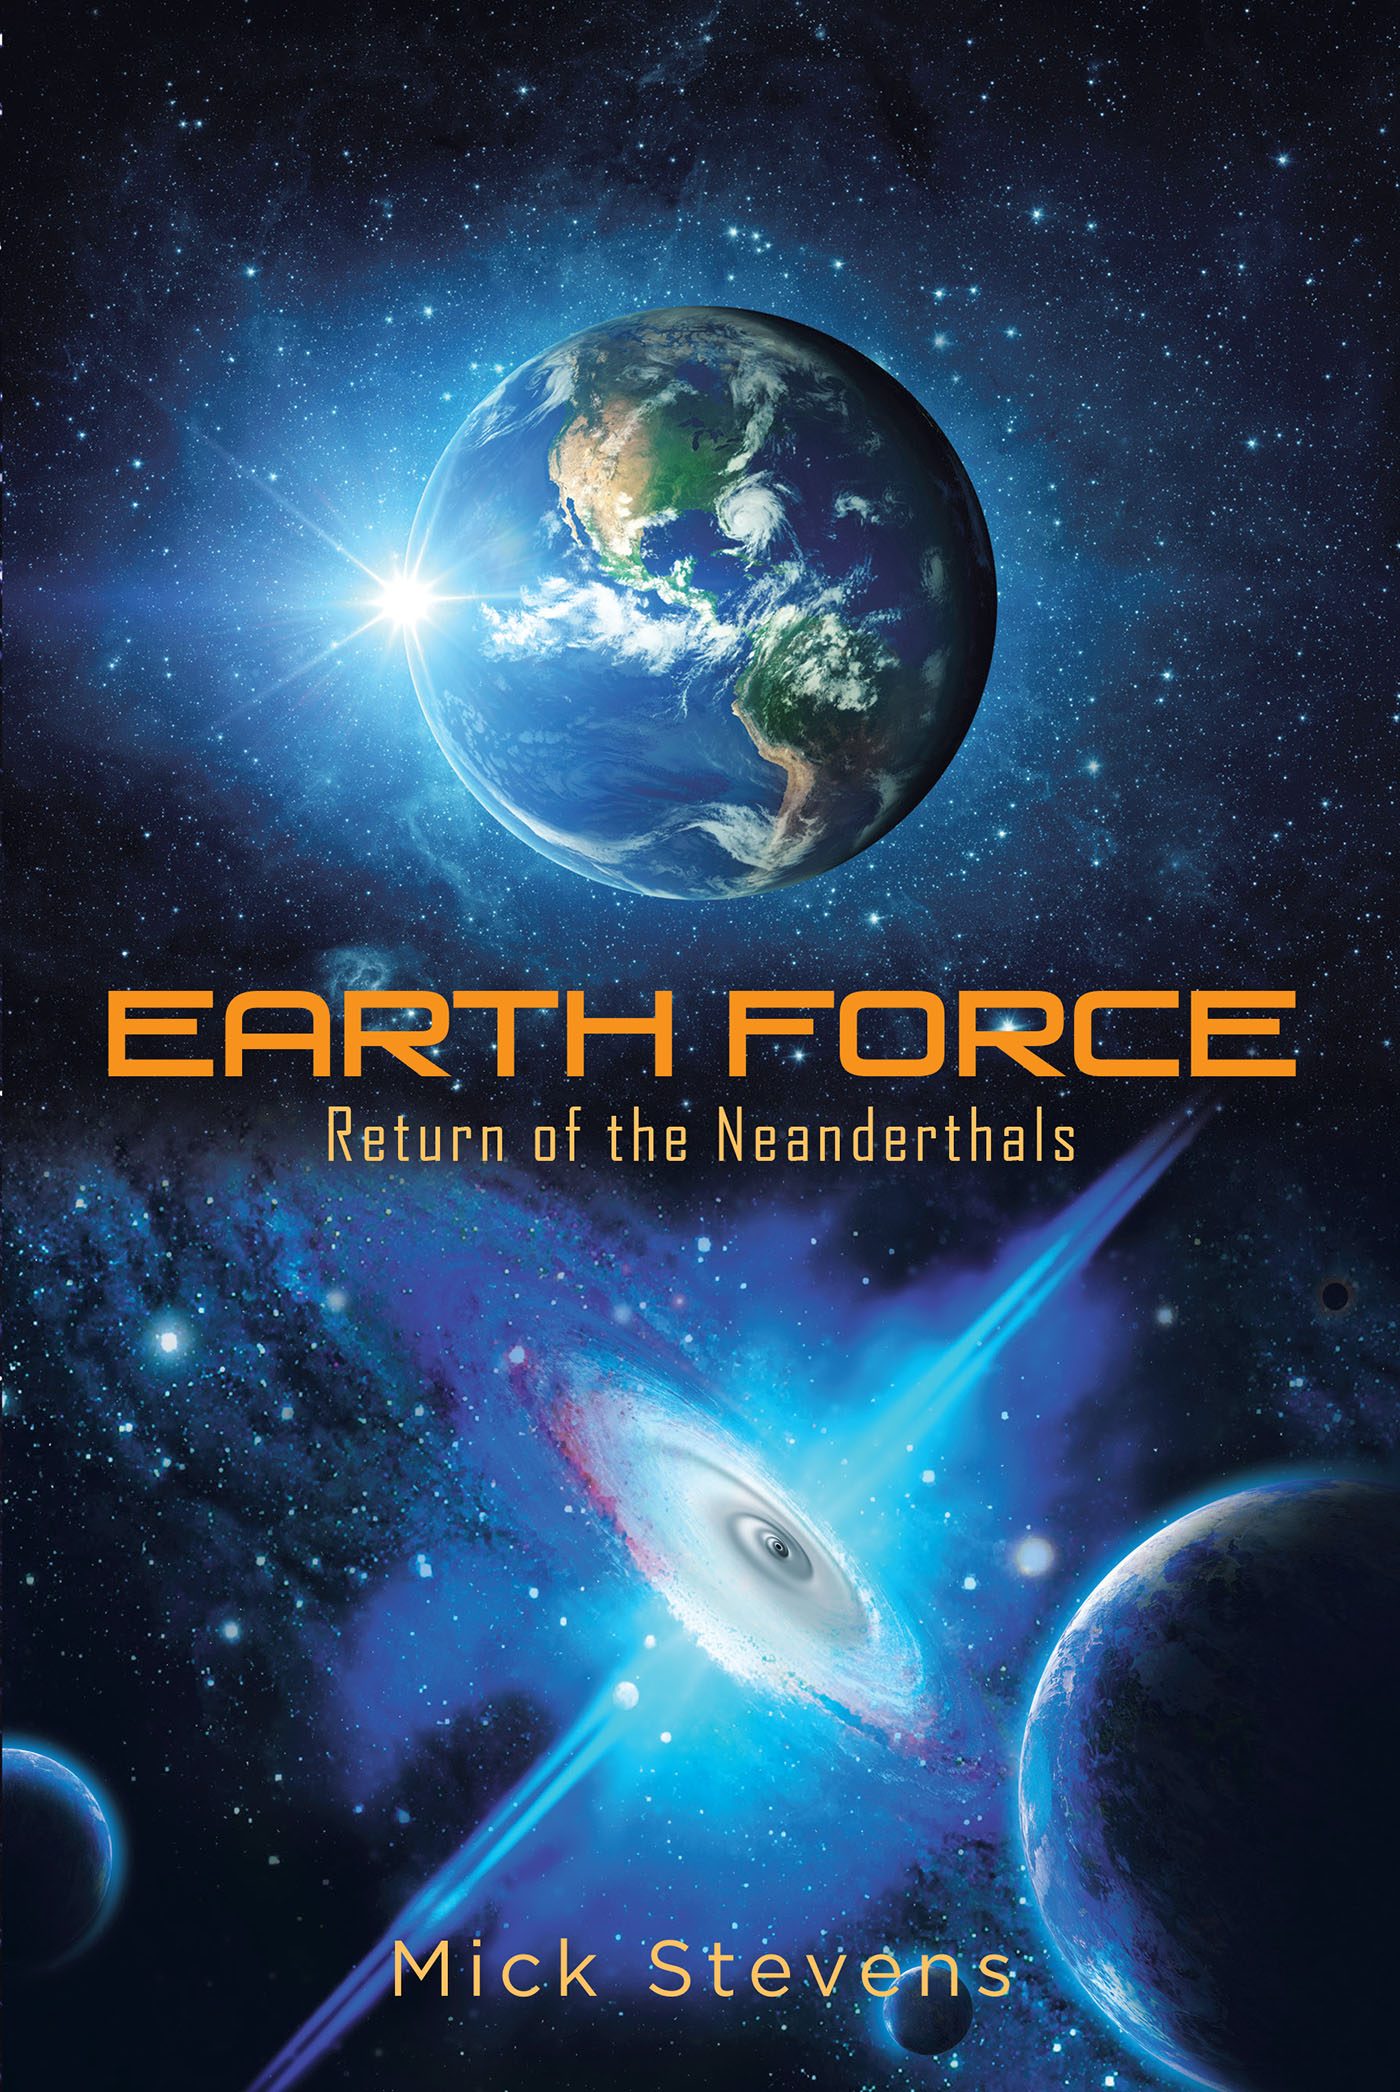 Mick Stevens’s New Book, "Earth Force: Return of the Neanderthals," is a Daring and Lively Novel That Follows the Adventure of the Fighting Team Known as Earth Force